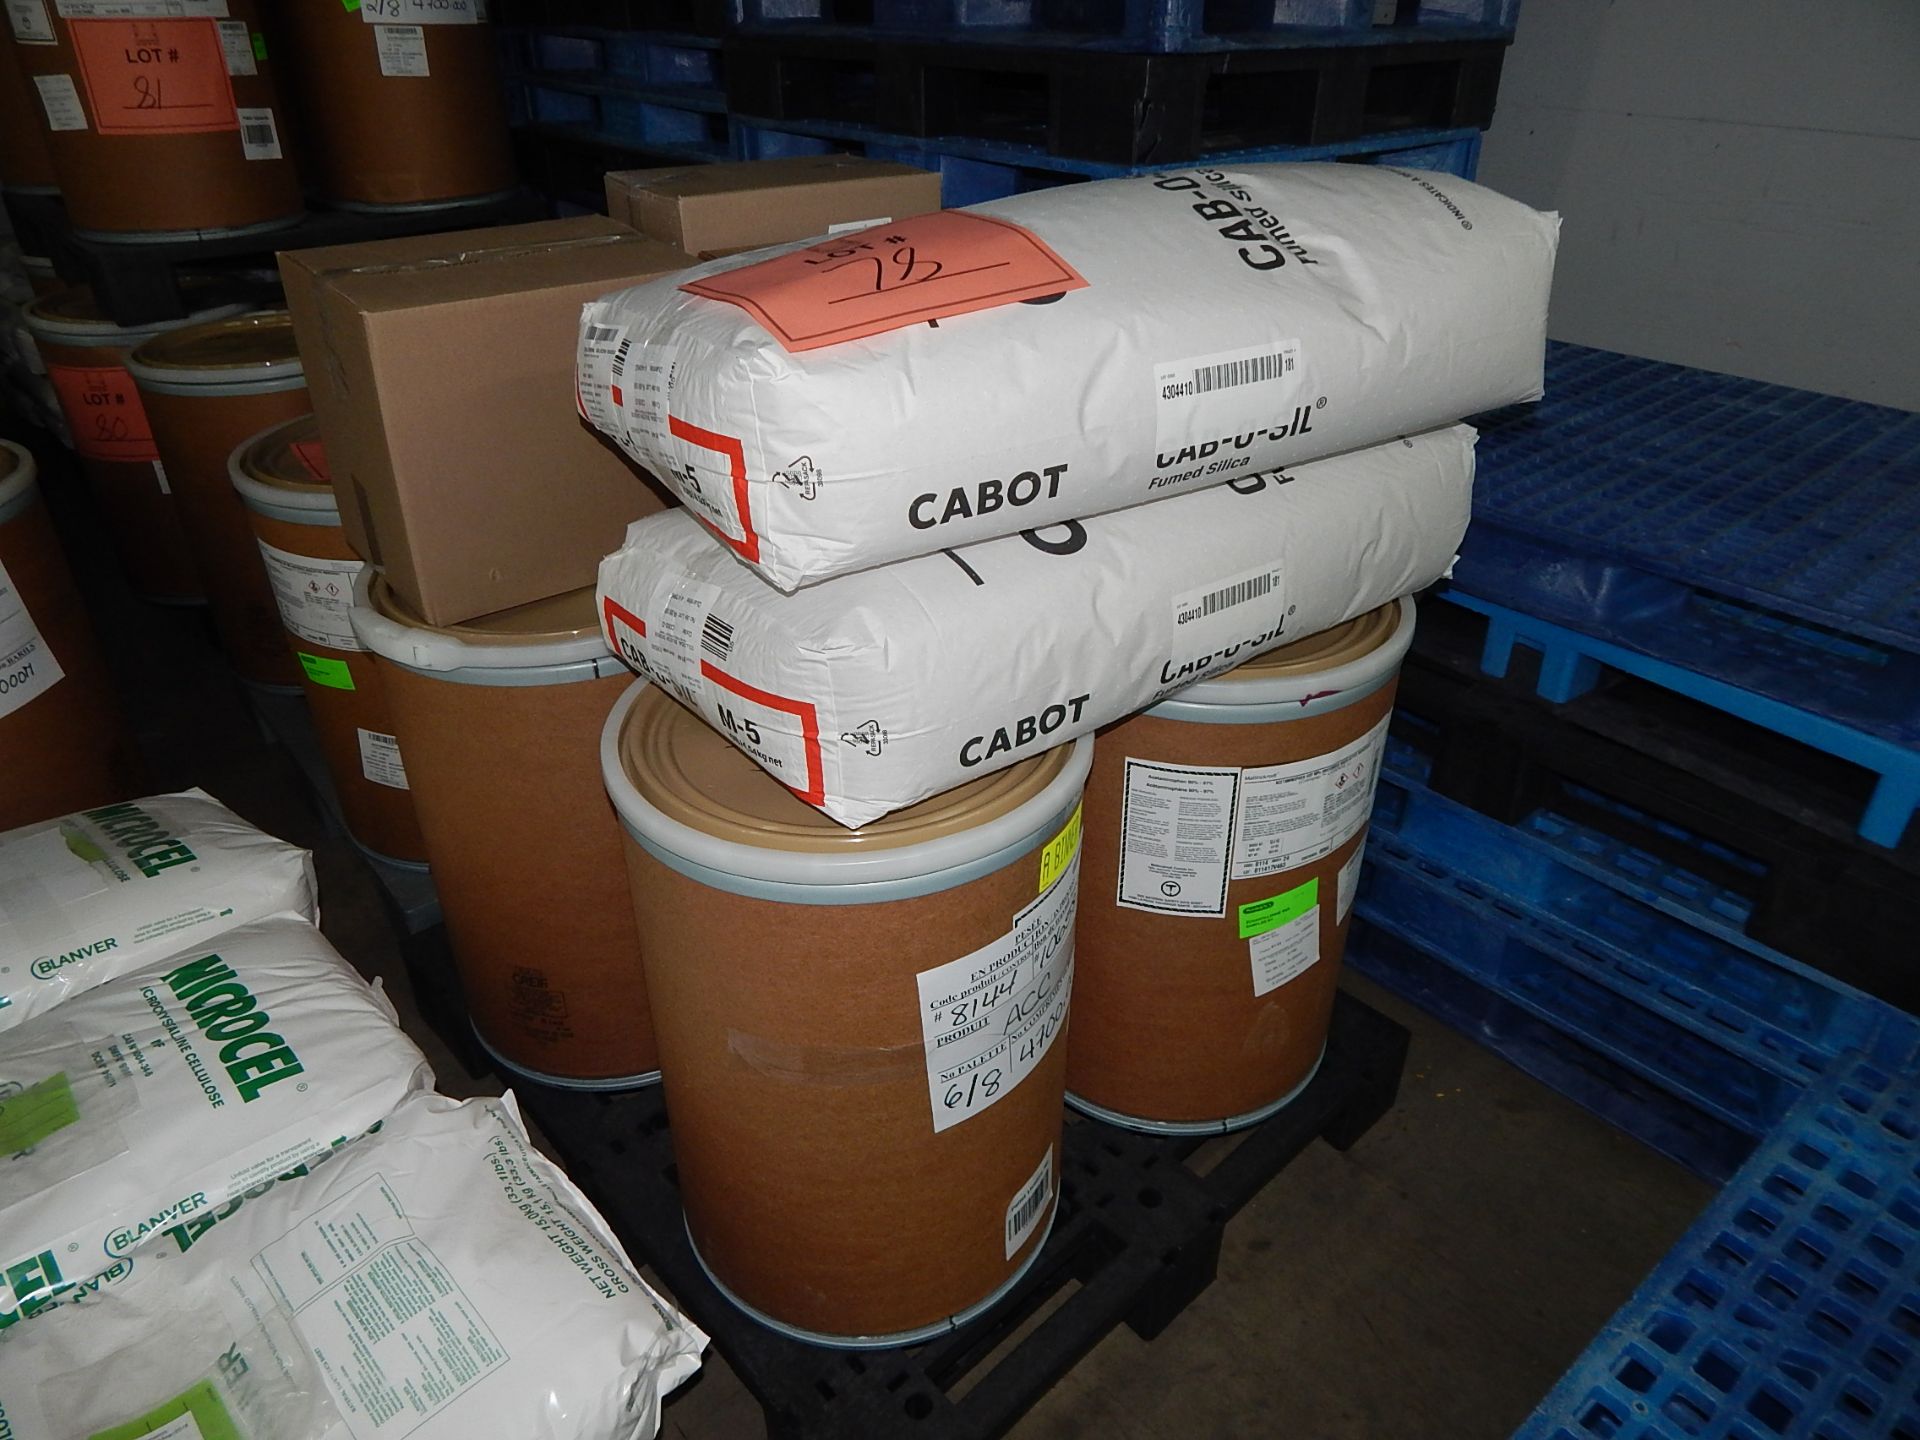 LOT/ SKID WITH CONTENTS CONSISTING OF BARRELS OF ACETAMINOPHEN AND BAGS OF FUMED SILICA